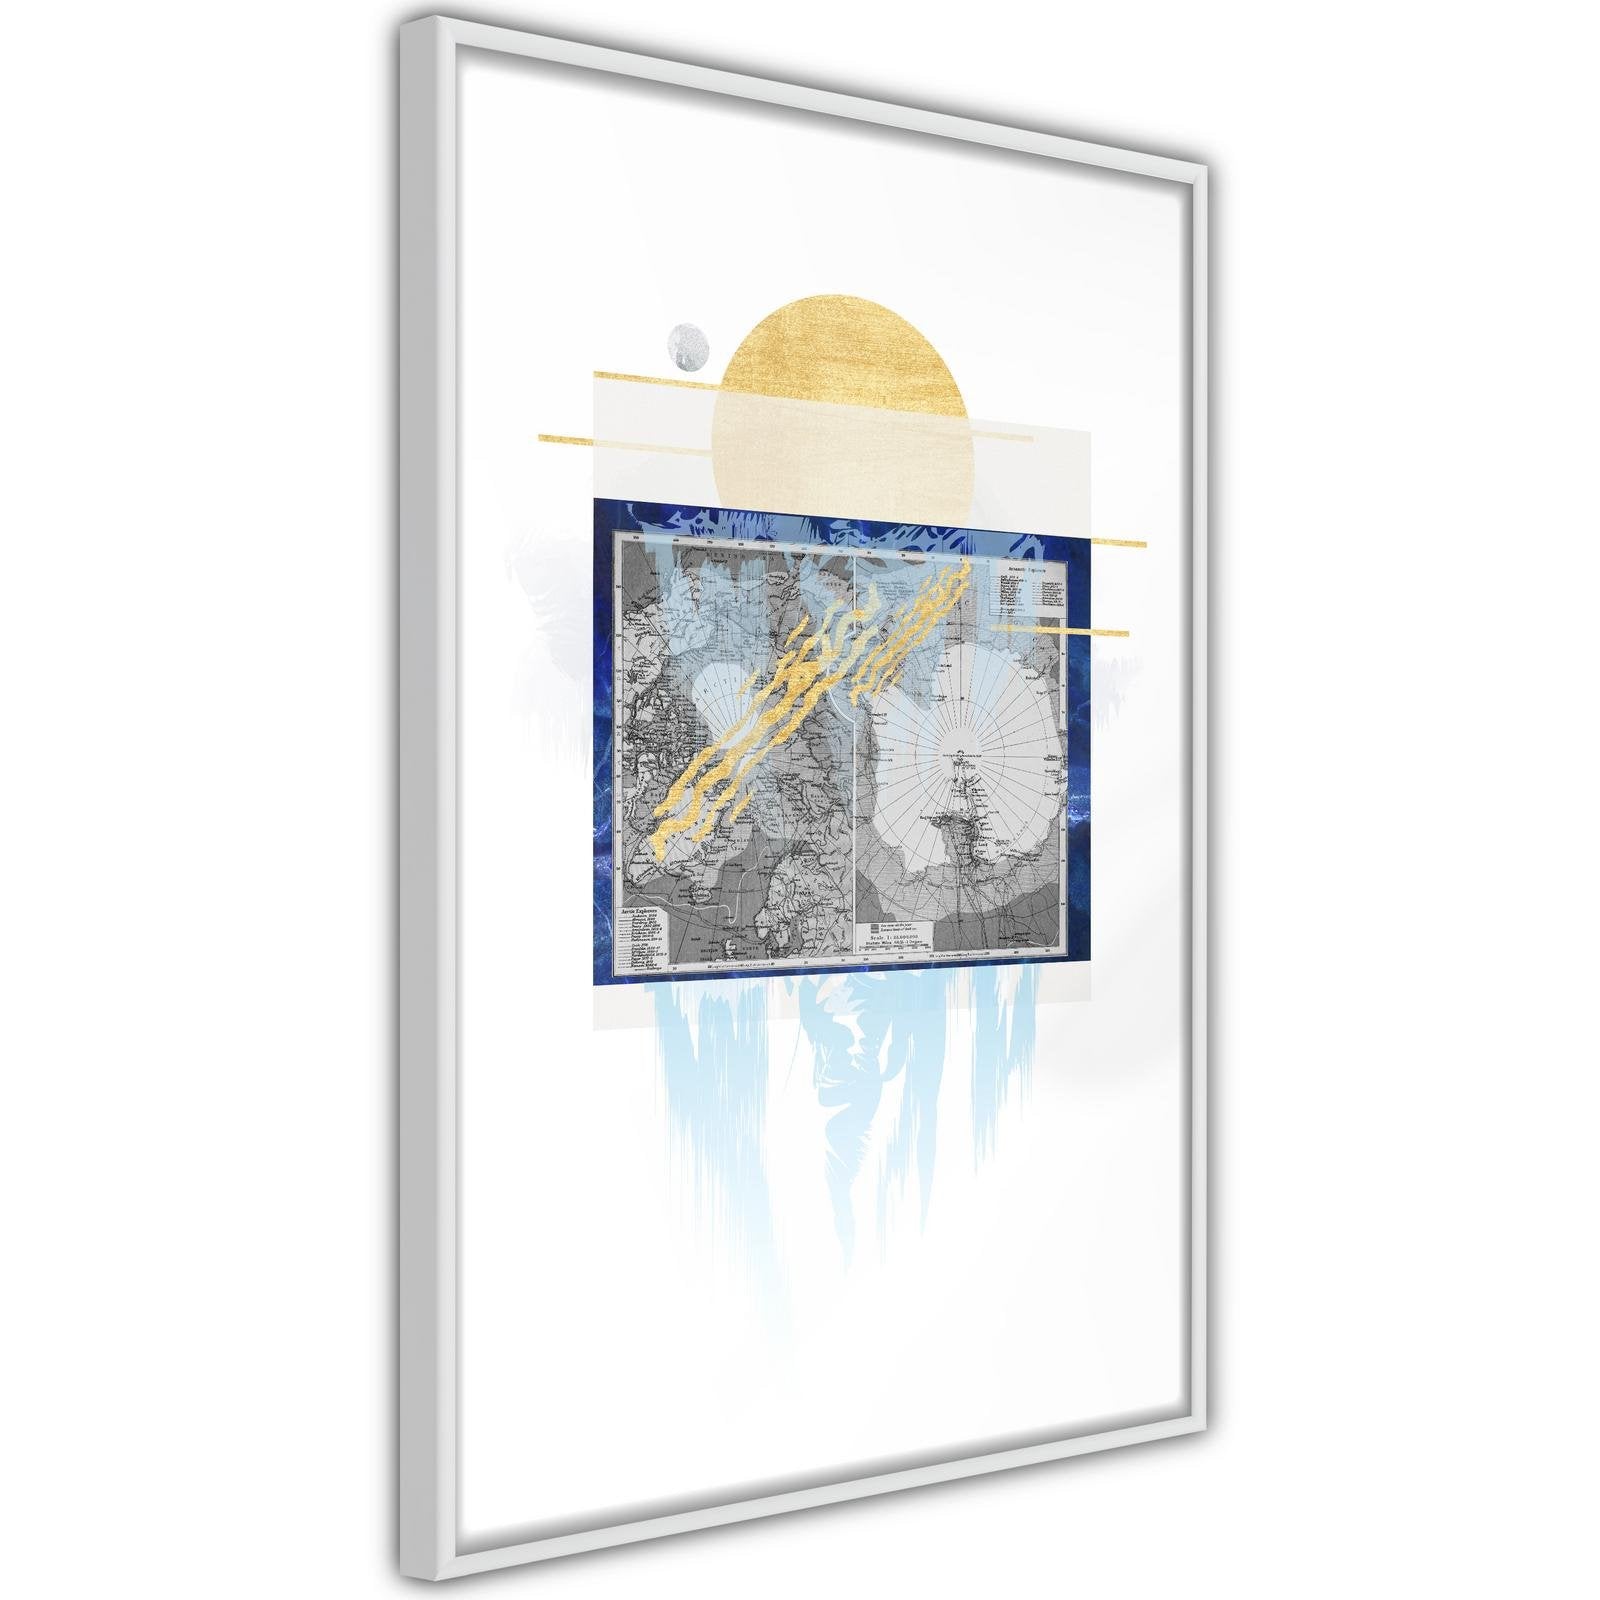 Inramad Poster / Tavla - The Coldest Continent-Poster Inramad-Artgeist-peaceofhome.se